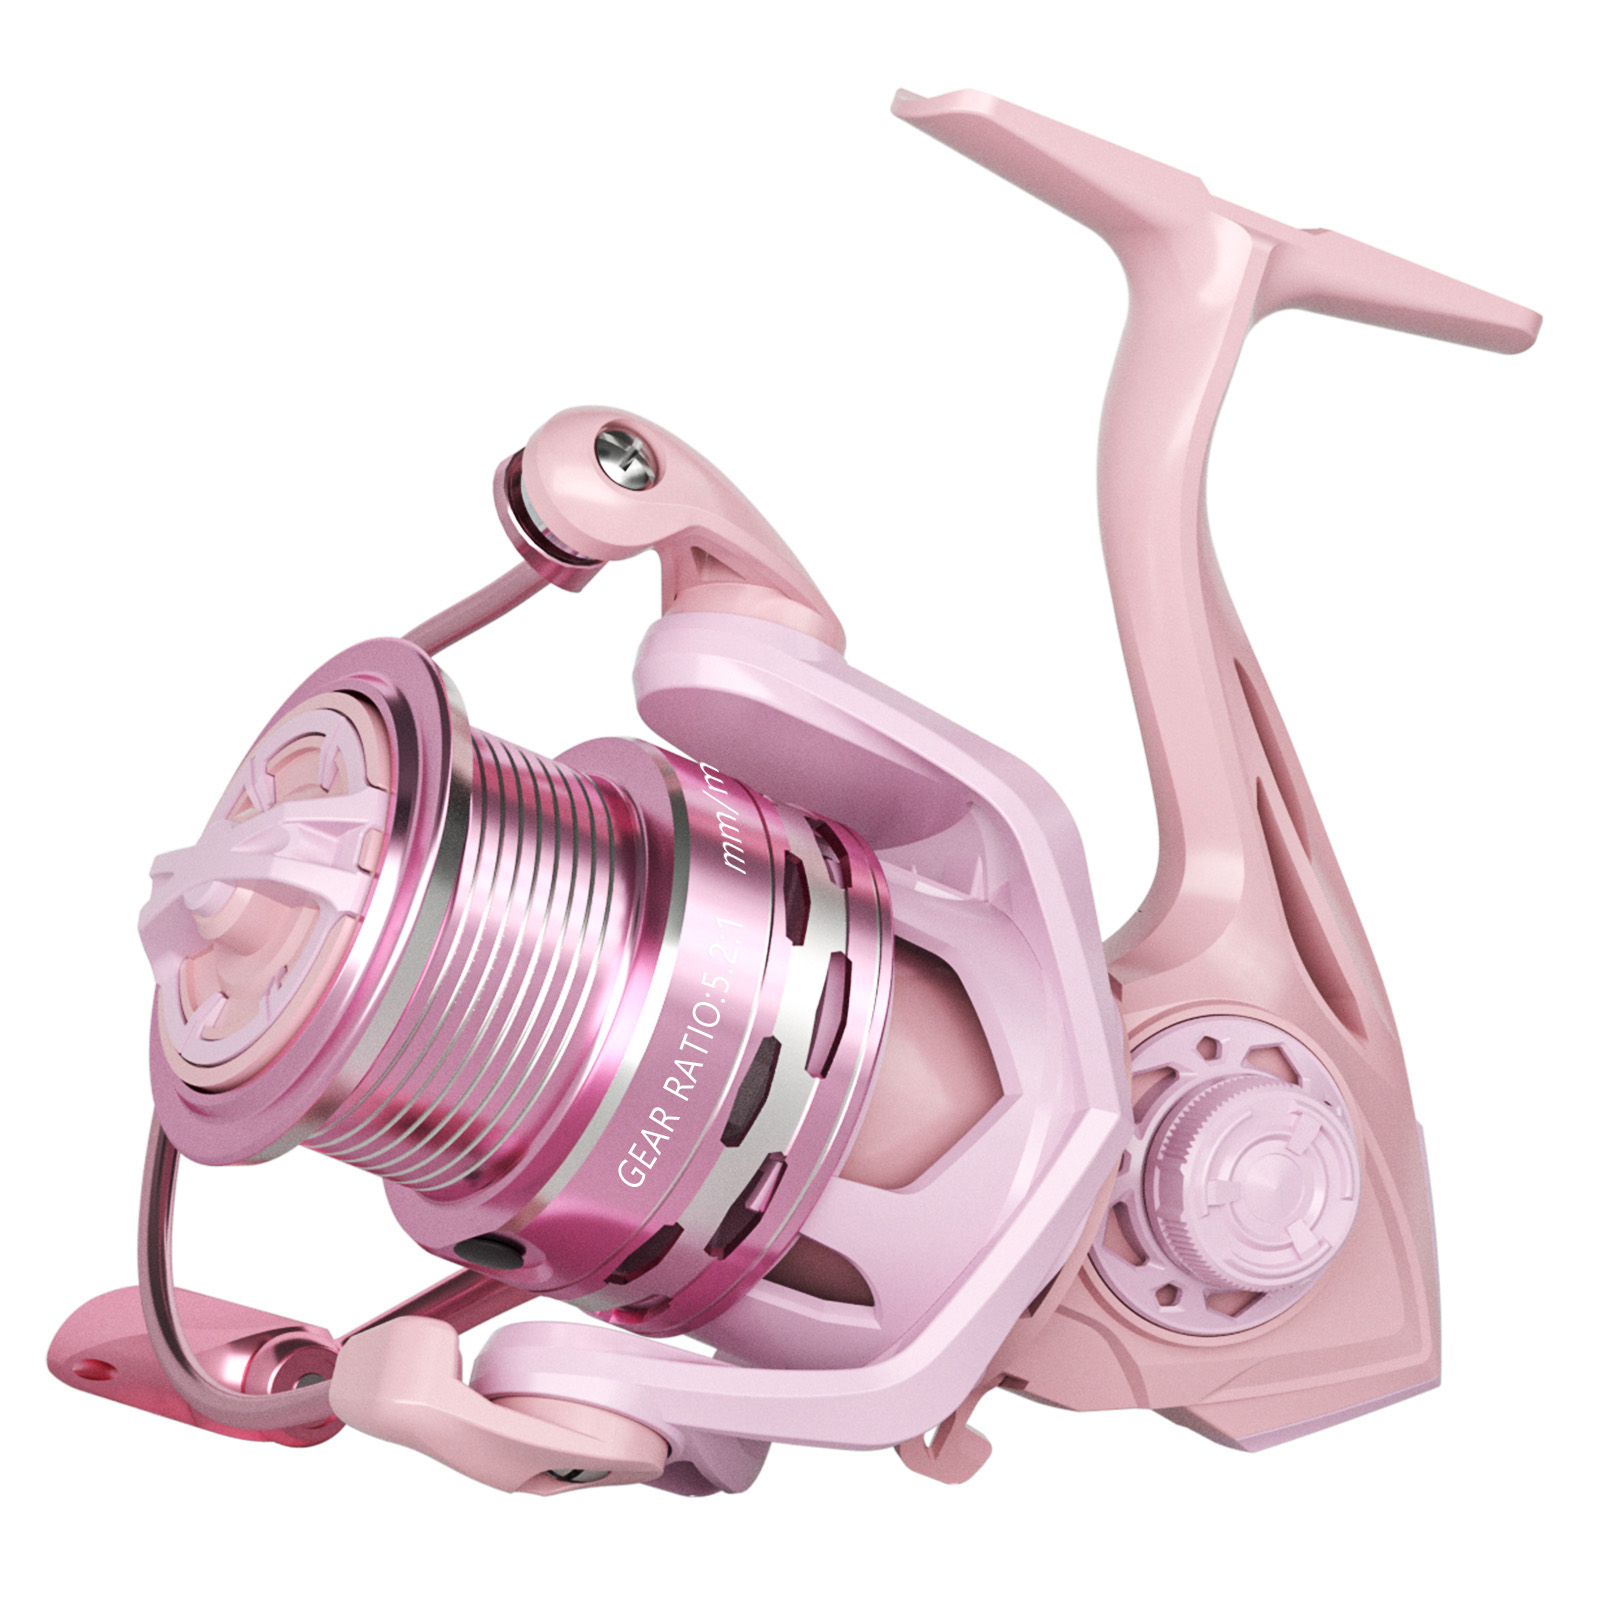 Carrete Spinning T-3000 5.2:1 rosa 